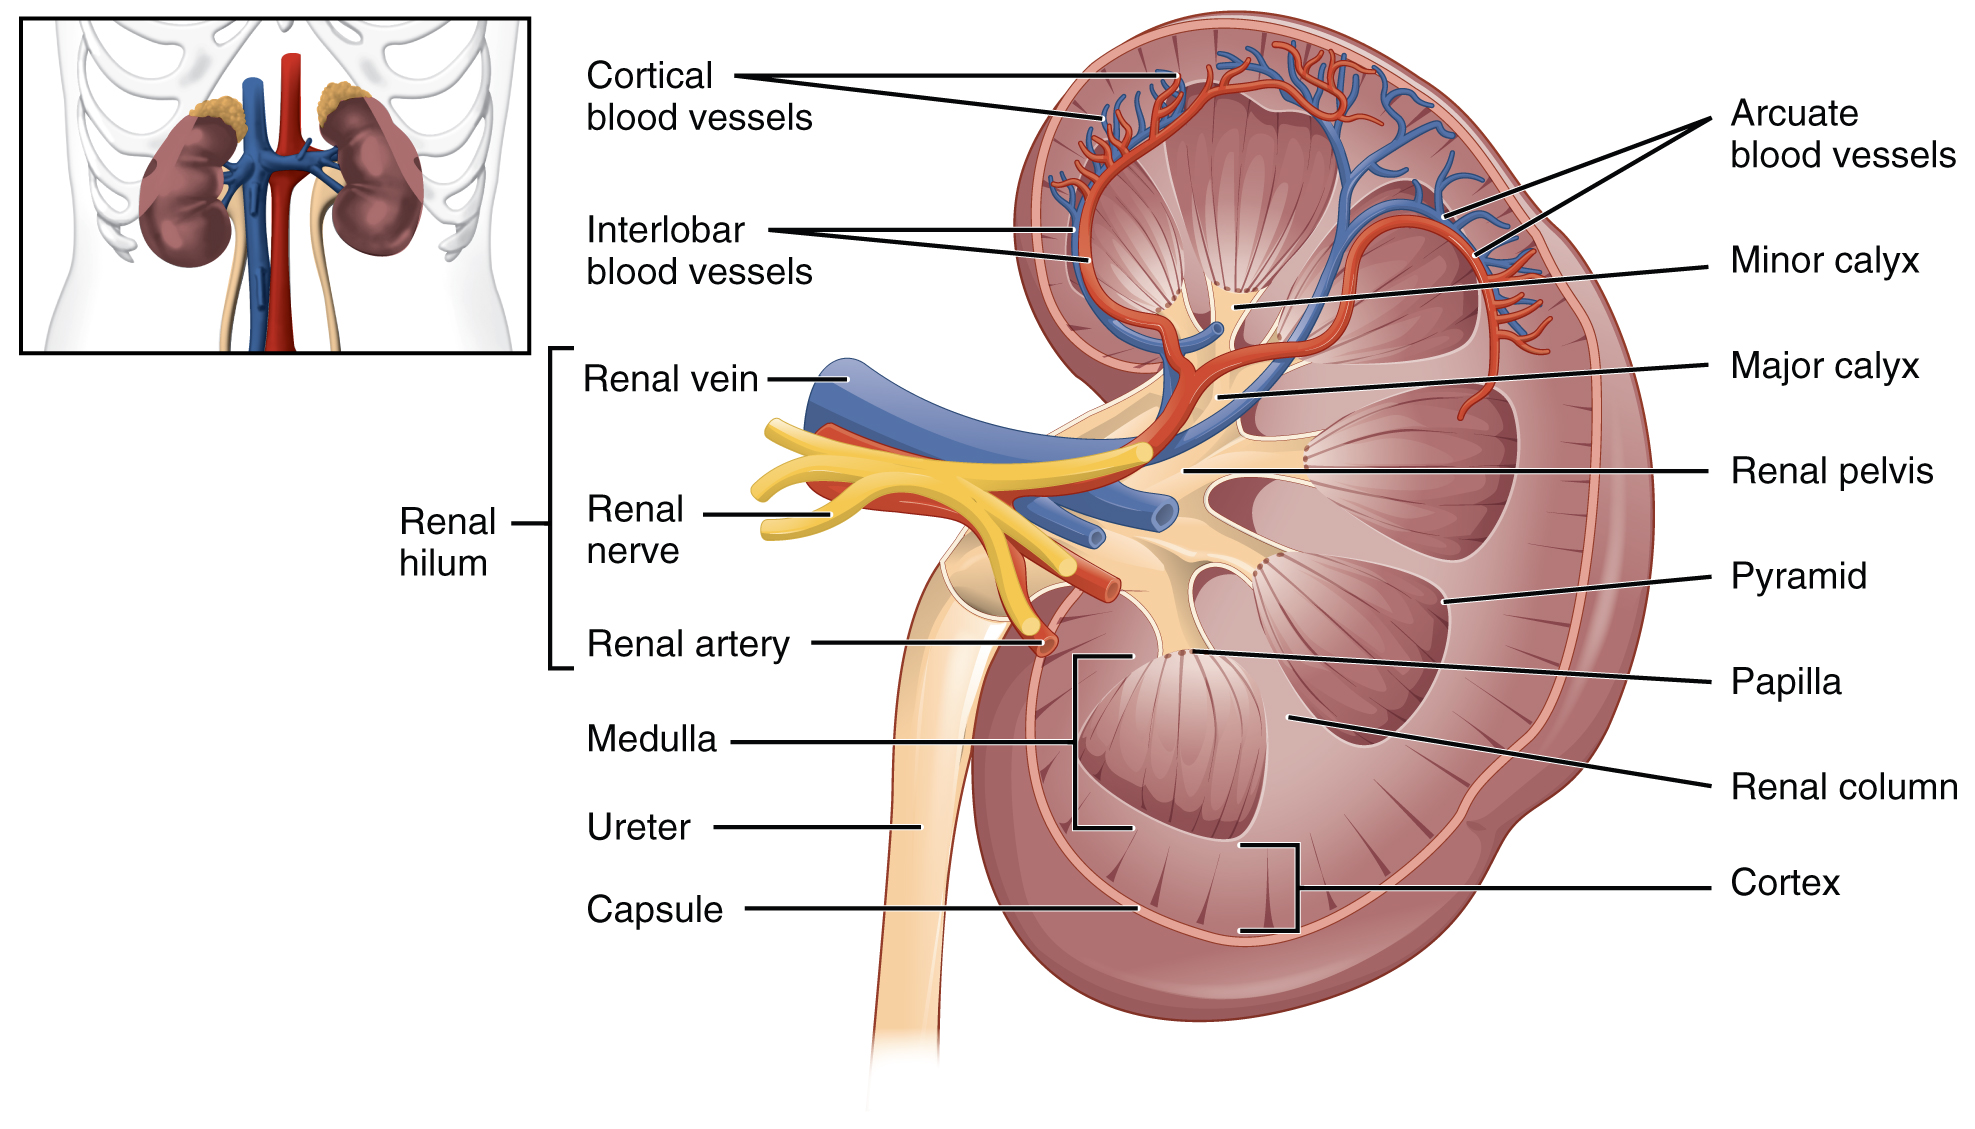 25.3 Gross Anatomy of the Kidney – Anatomy and Physiology